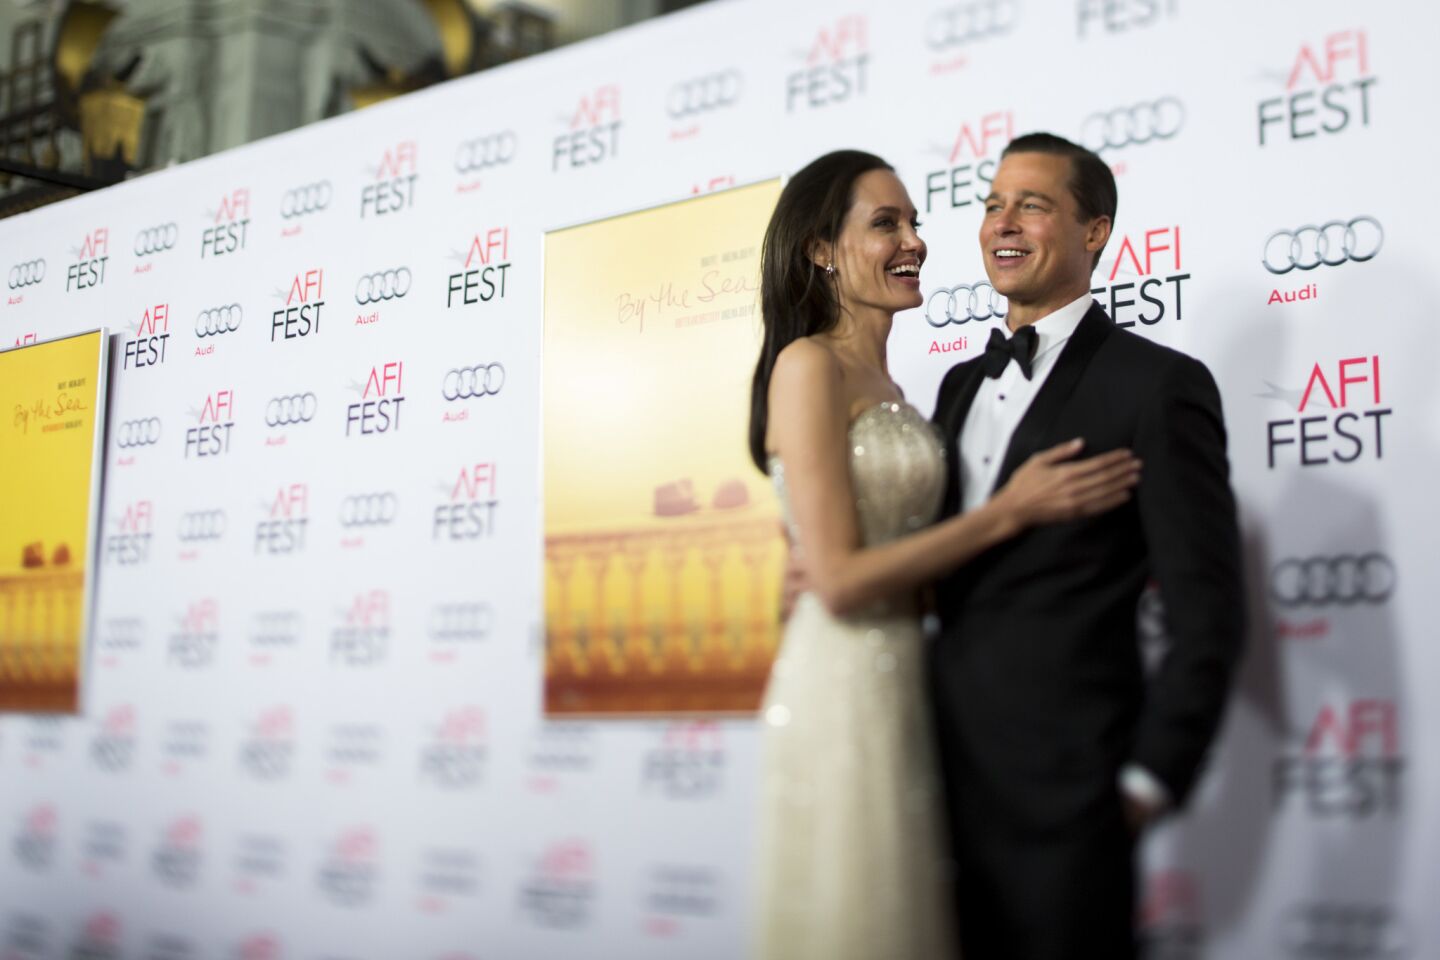 Angelina Jolie Pitt and Brad Pitt pose on the red carpet for the opening night premiere of their film "By the Sea" in Hollywood in November 2015.